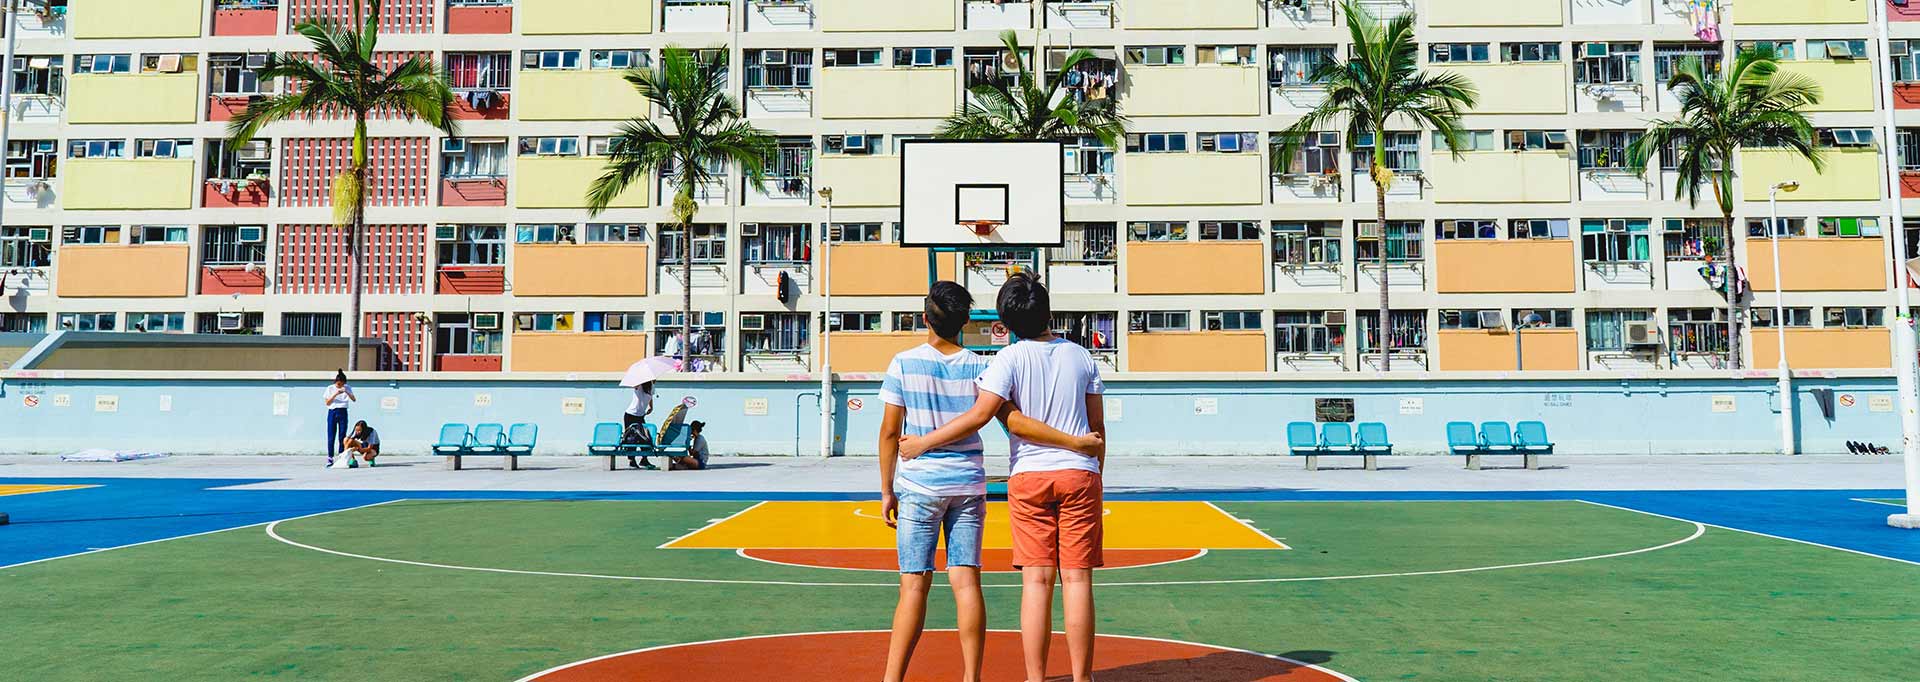 Two people standing on a basketball court with their arms around each other staring at a multistory building